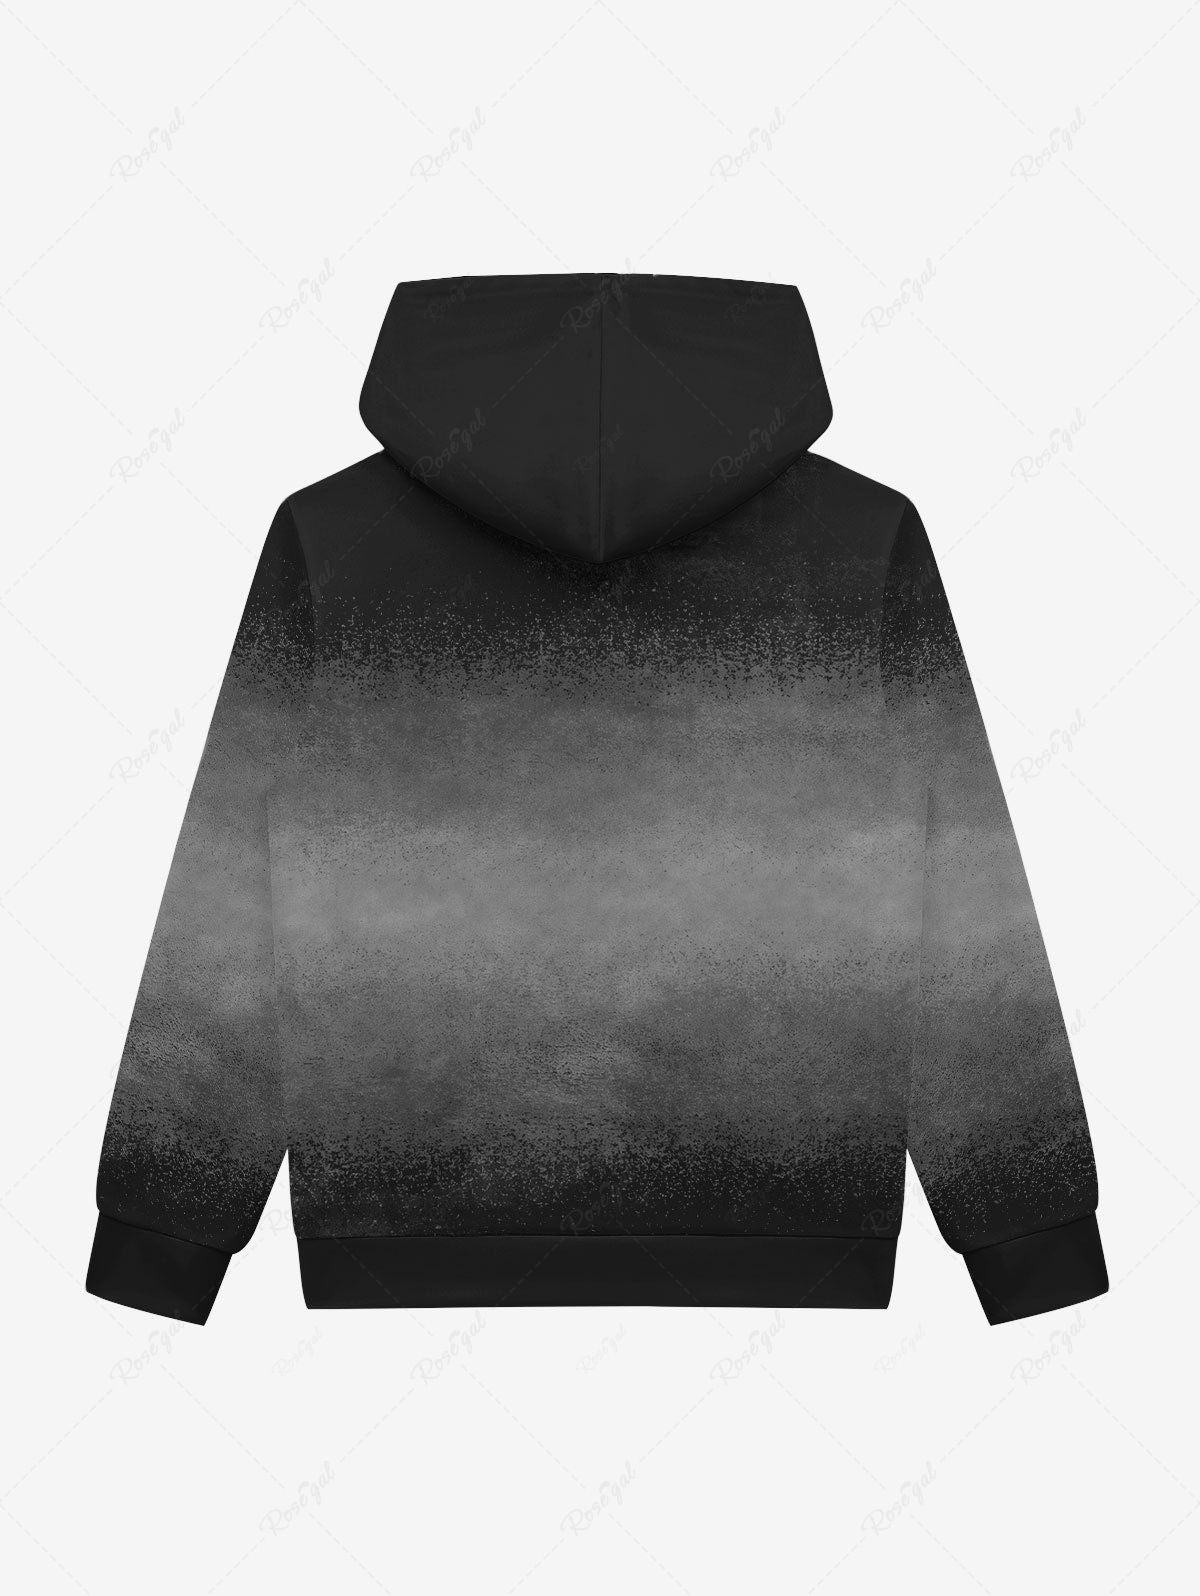 Gothic Layered Ombre Print Full Zipper Pockets Fleece Lining Hoodie For Men